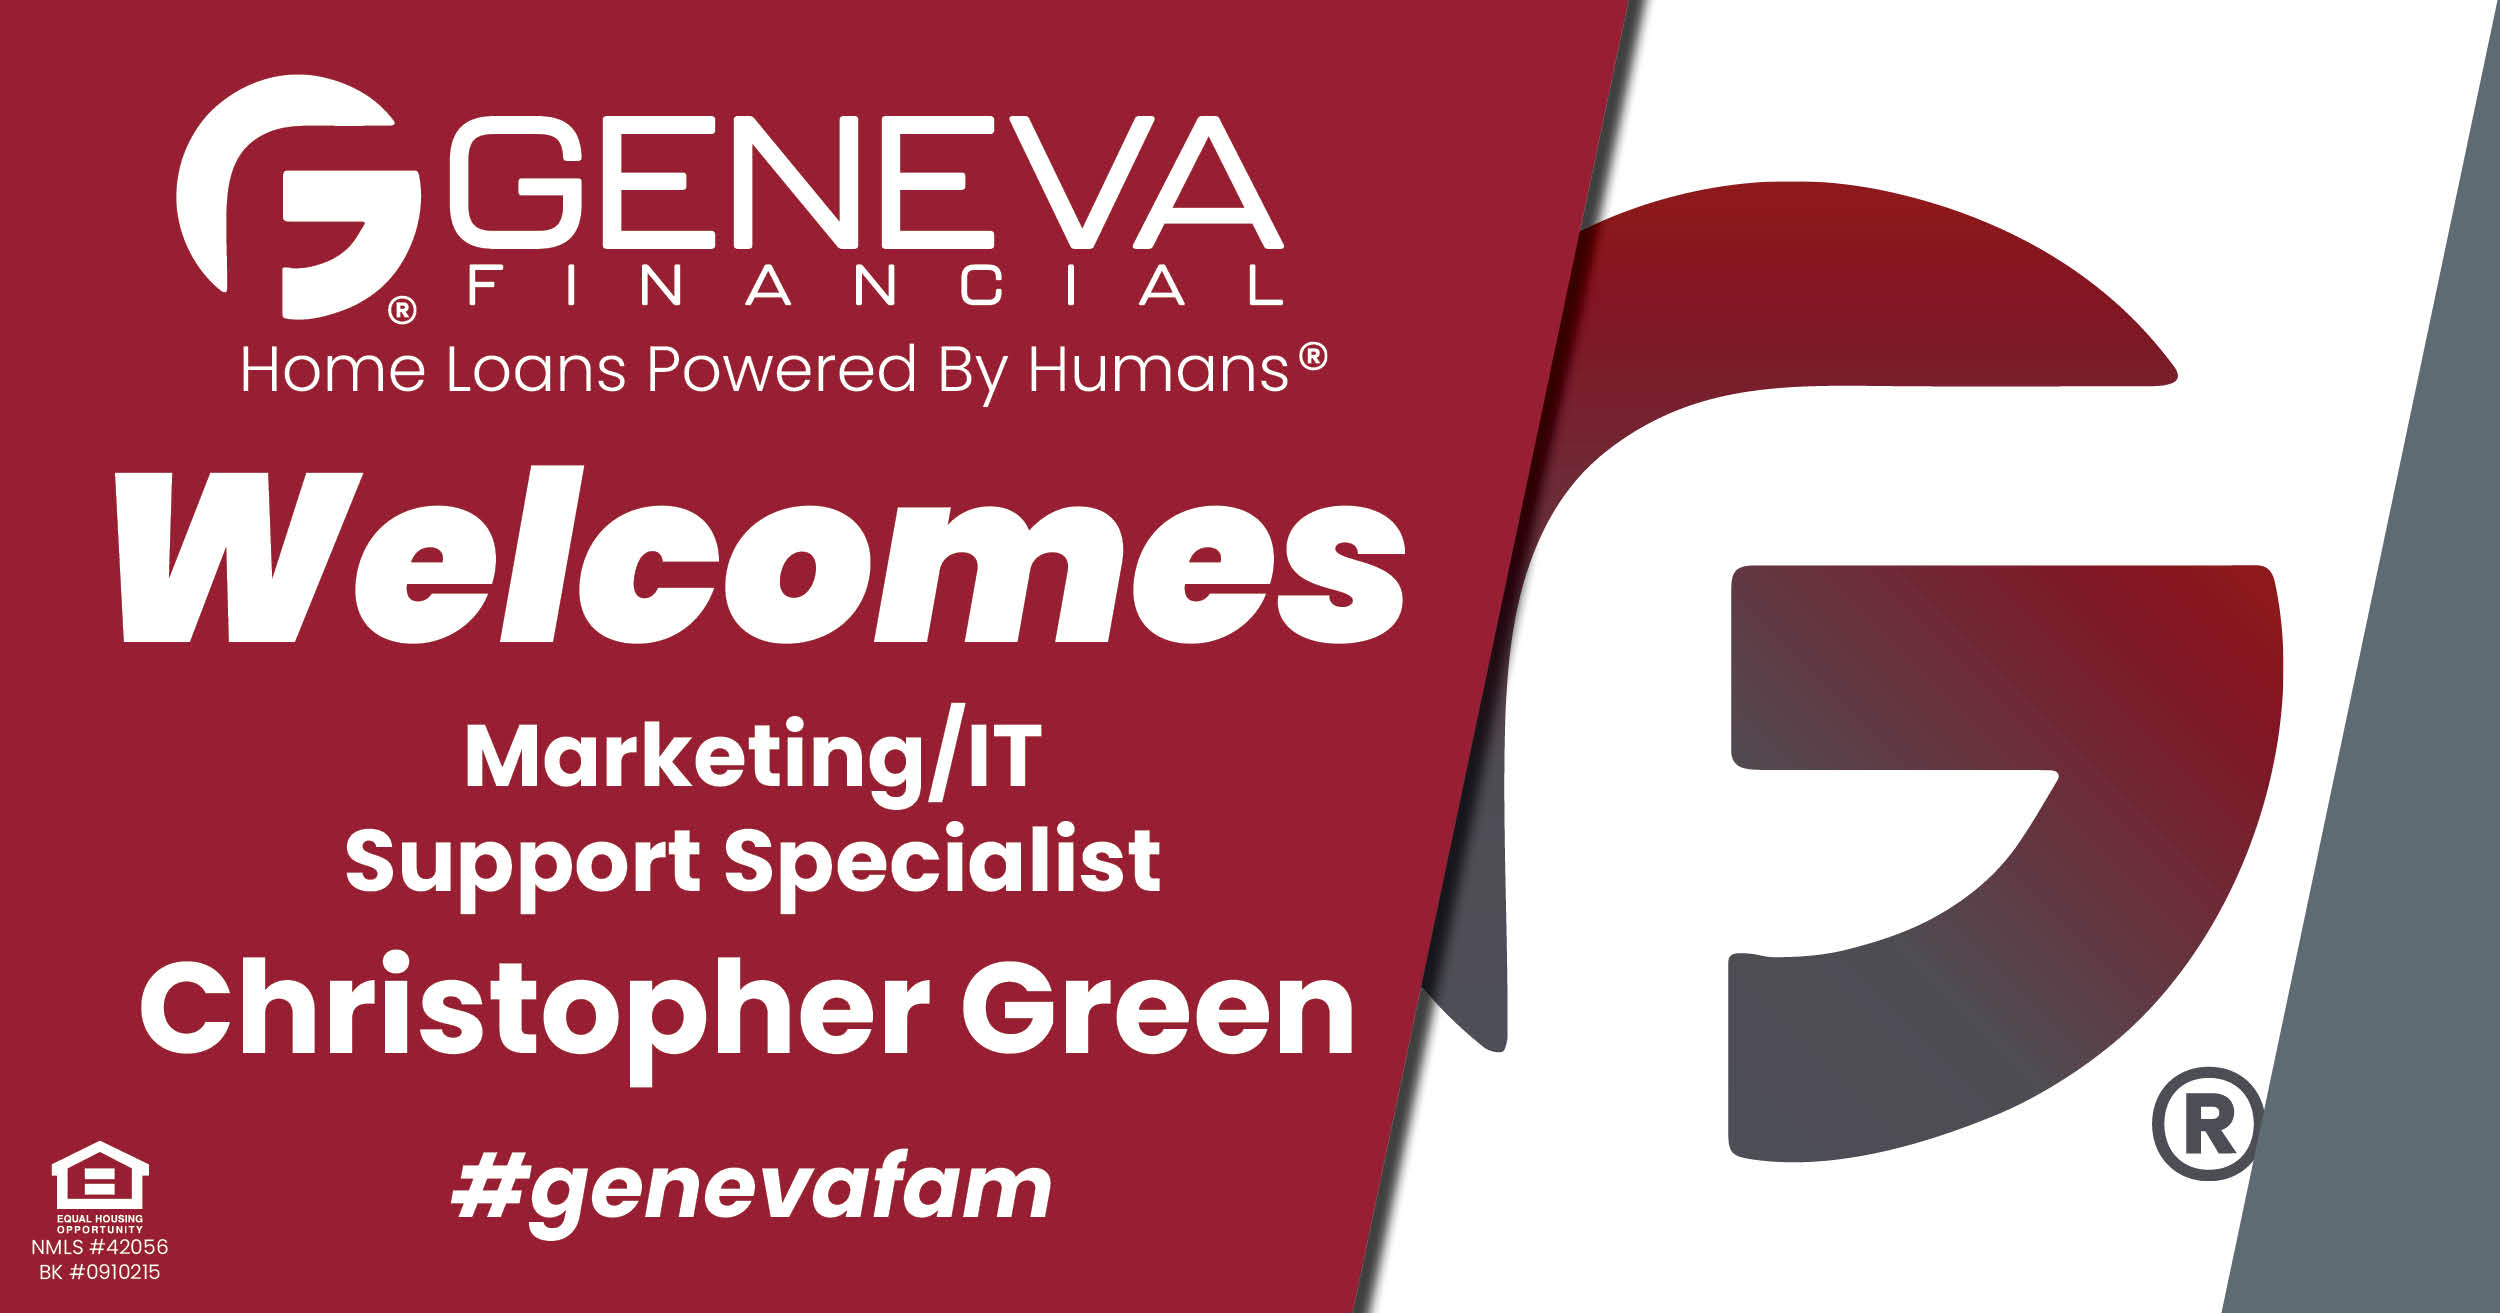 Geneva Financial Welcomes New Marketing/IT Support Specialist Christopher Green to Geneva Corporate – Home Loans Powered by Humans®.